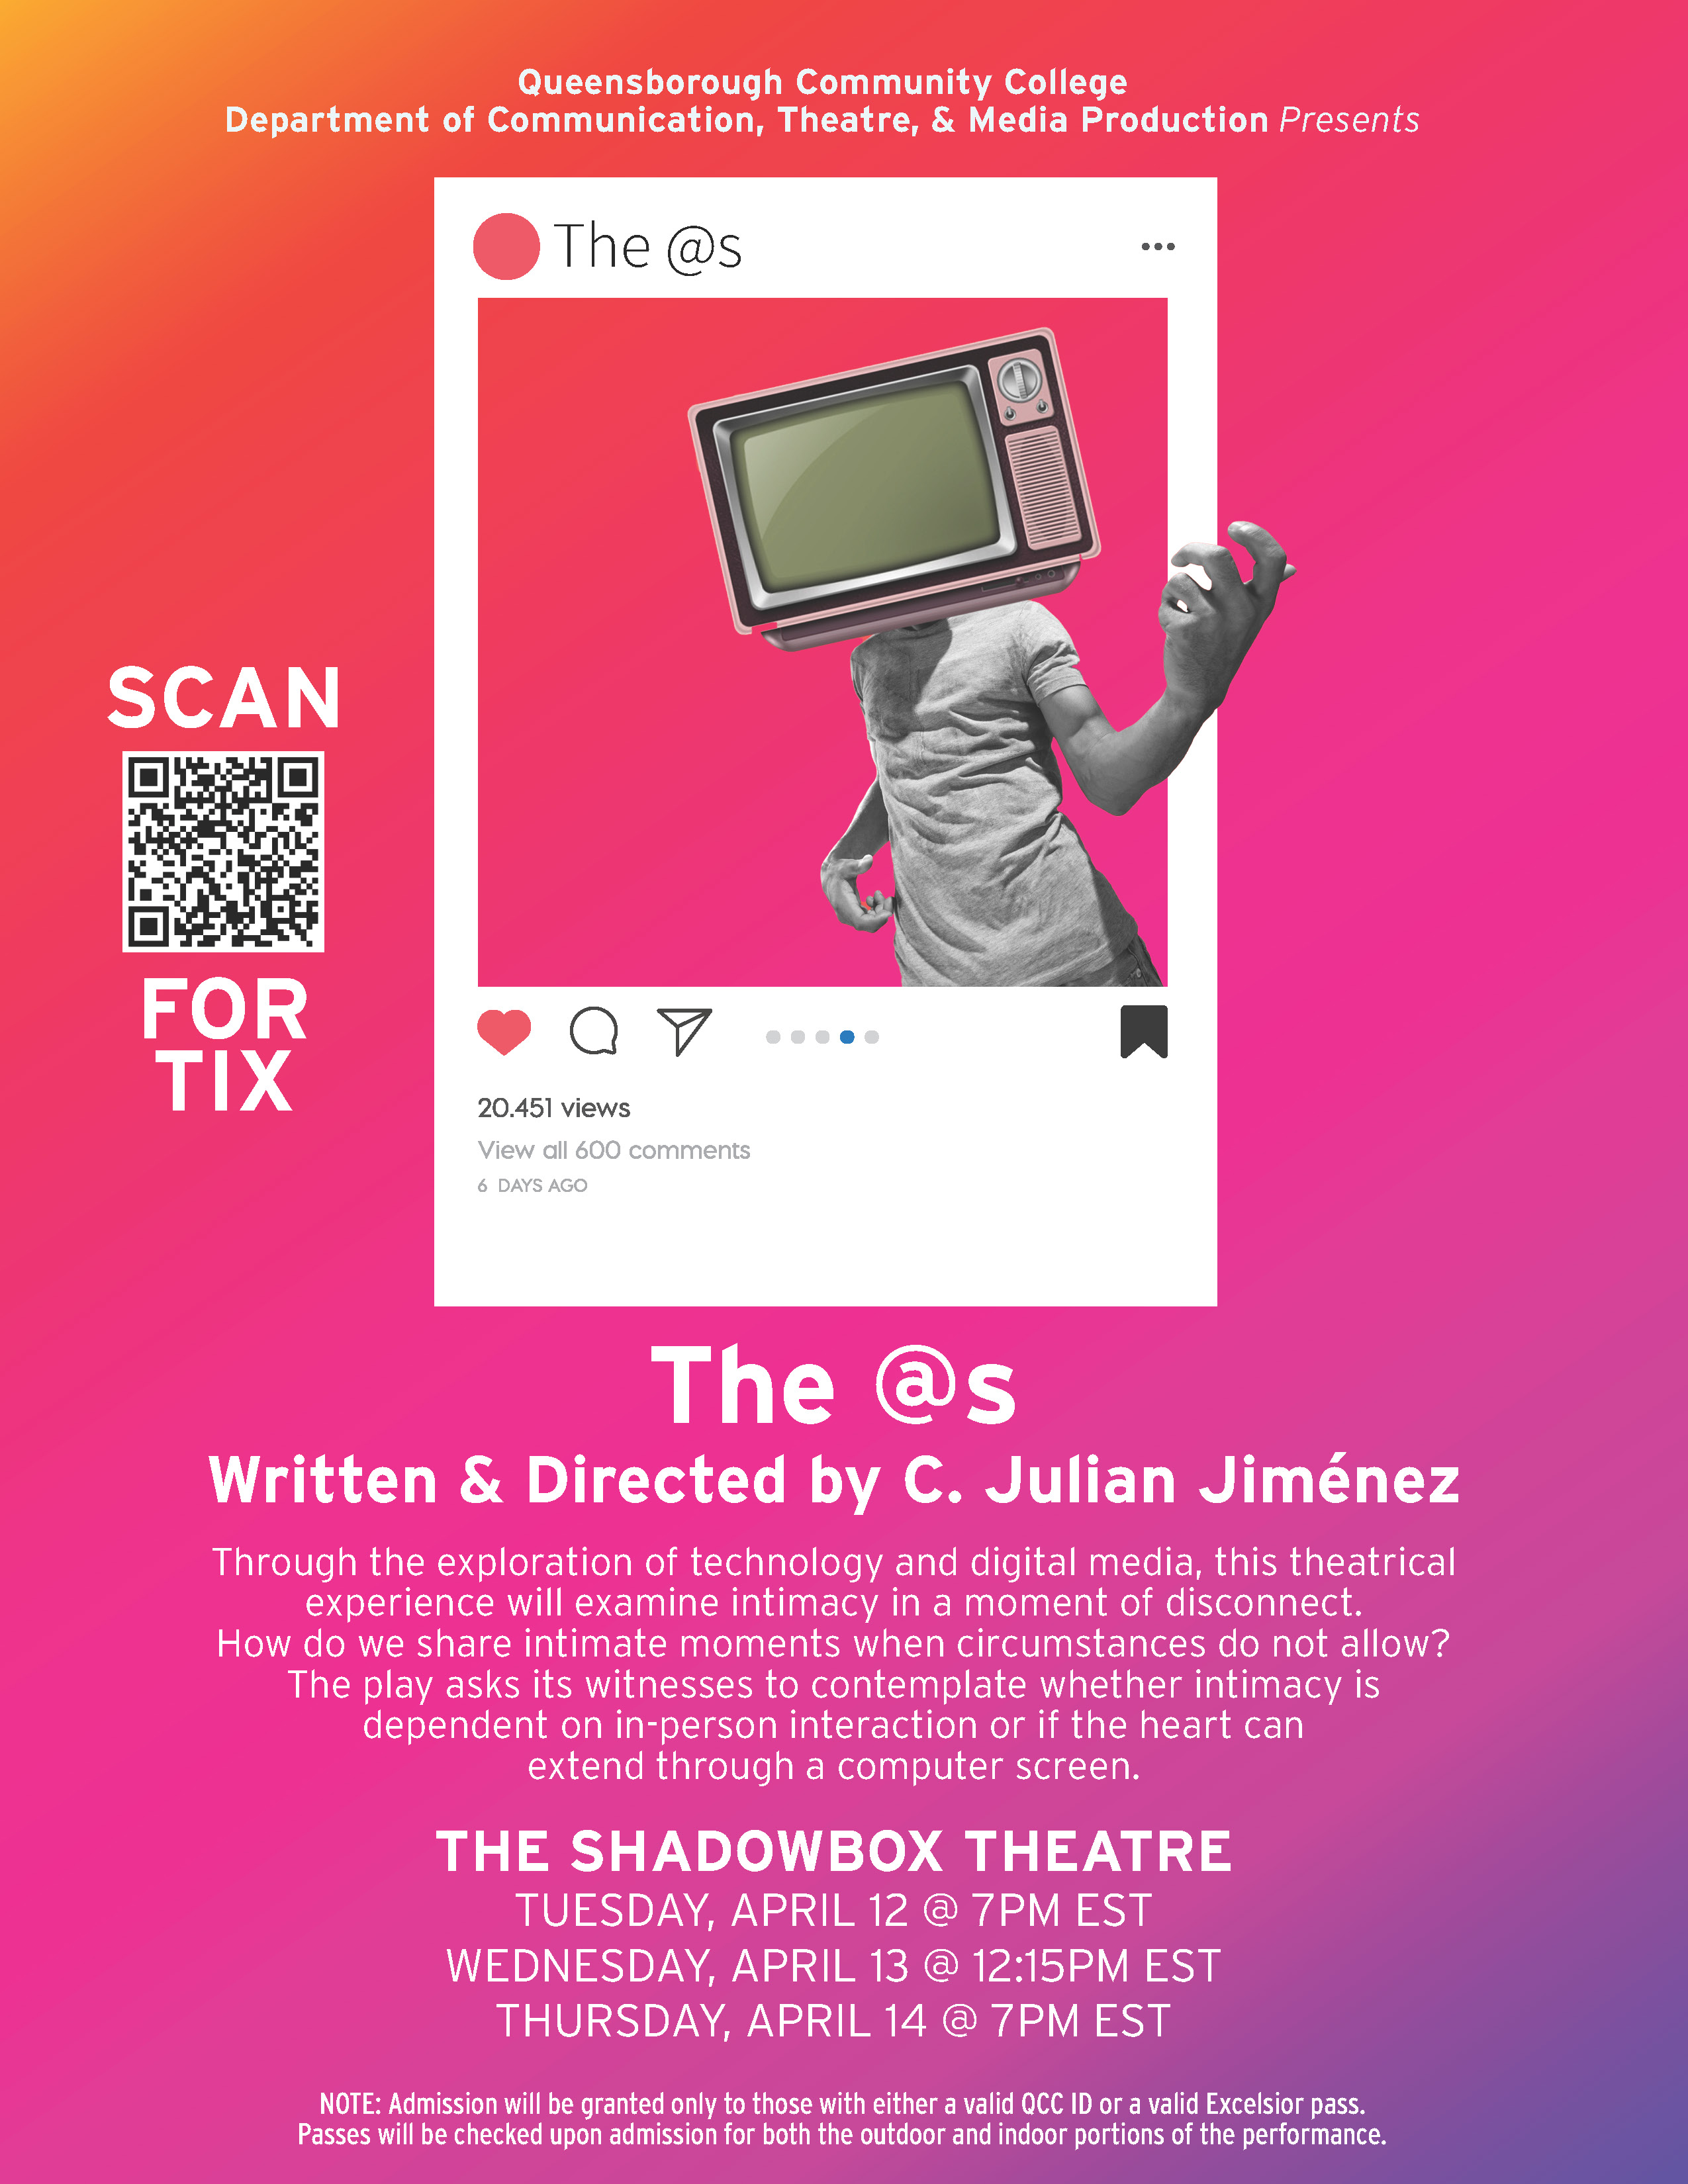 This is a poster for the spring 2022 production of ‘The @s’ Written and Directed by Professor C. Julian Jimenez. The poster displays a lone young individual peeking out behind a social media post with a television as a head.